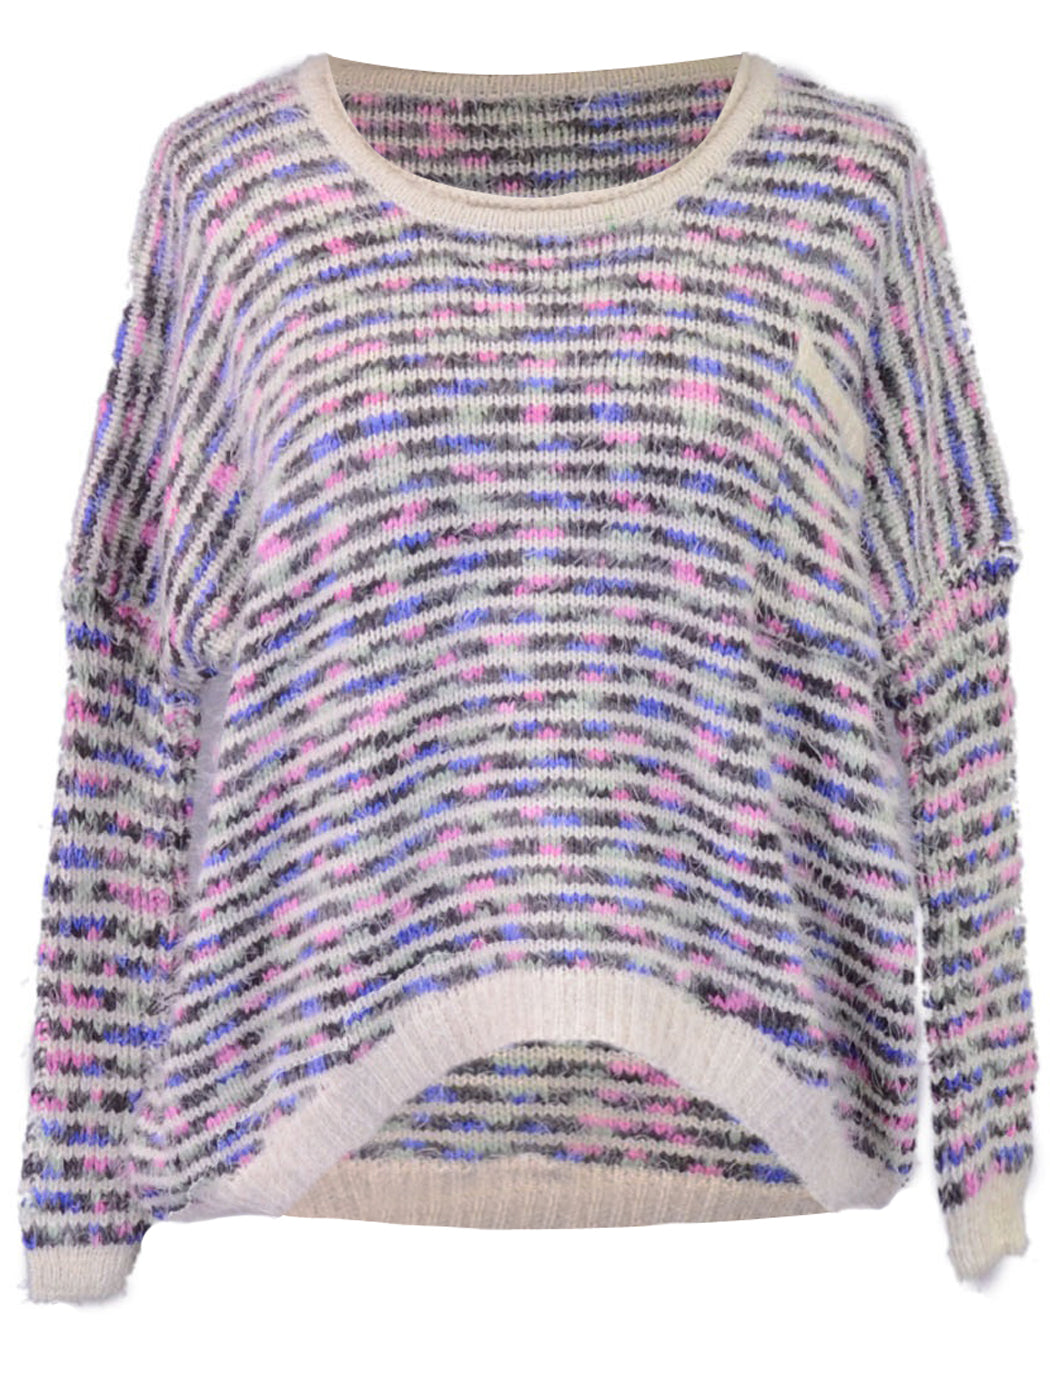 Oxford Circus Fuzzy Cozy Candy Stripes Pullover Long Sleeves Sweater Top